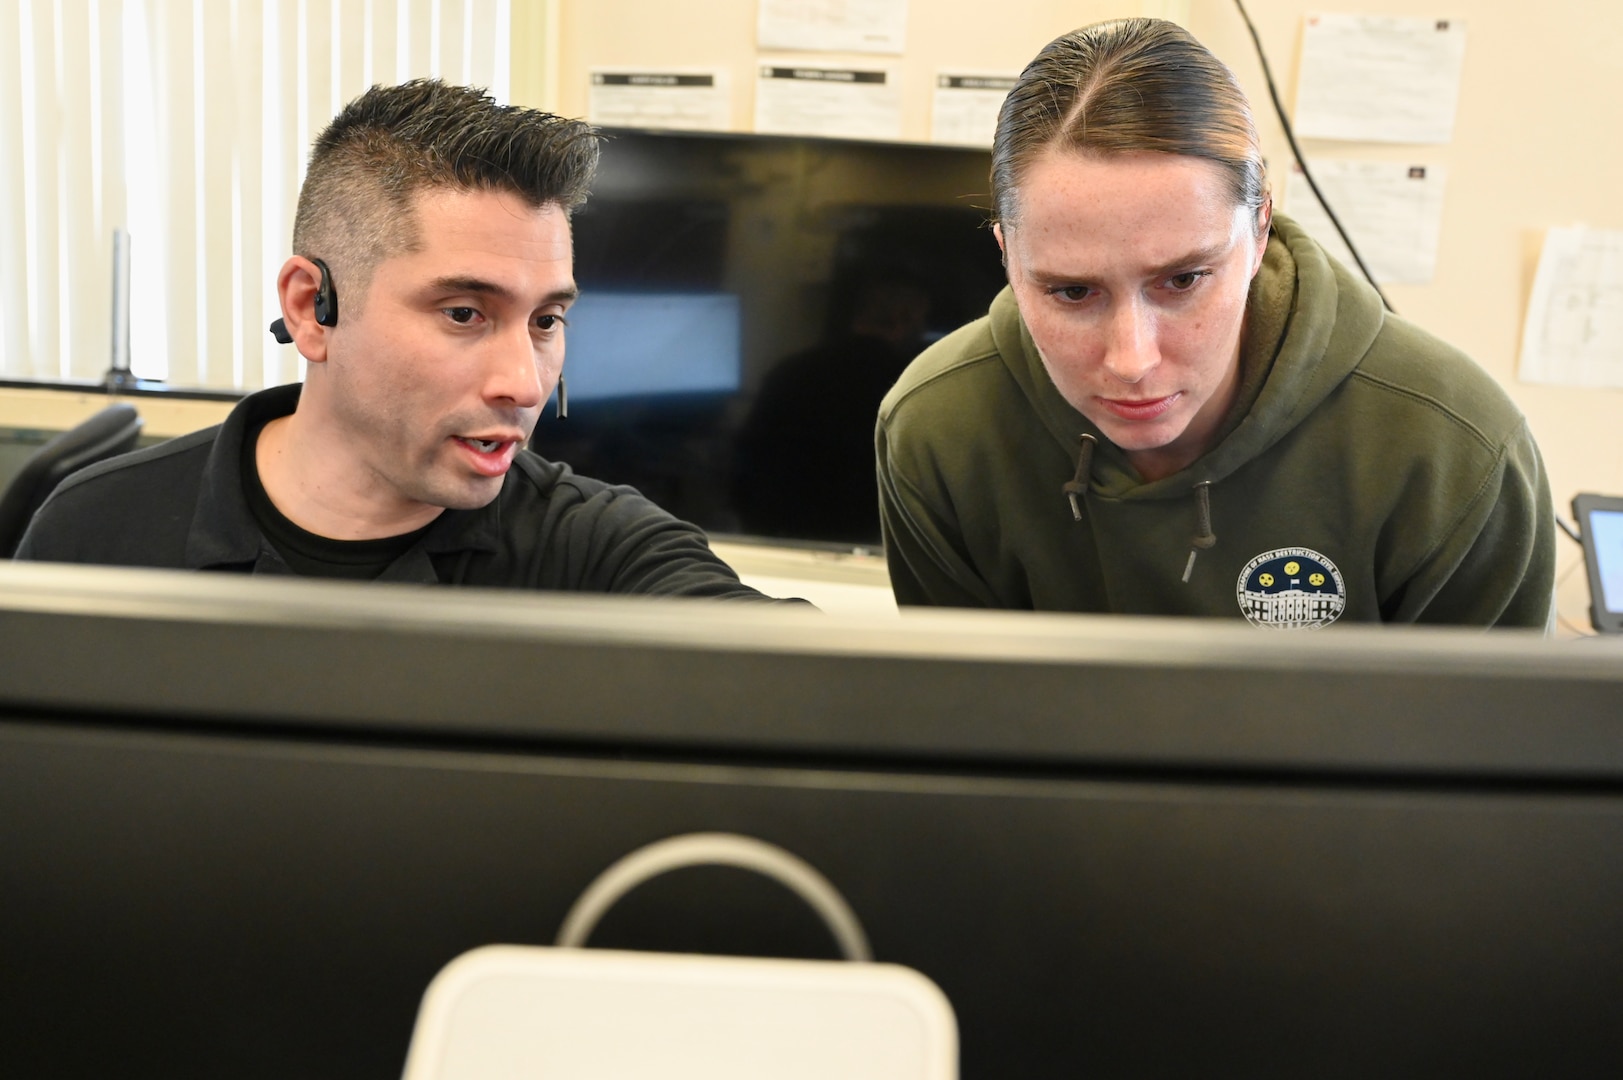 U.S. Army Sgt. 1st Class Daniel Garcia, operations noncommissioned officer and GIS modeler, 33rd WMD-CST, and U.S. Army Staff Sgt. Chasity Townsend, administration noncommissioned officer, 33rd WMD-CST, review a plan at the D.C. Armory, March 7, 2024.  The 33rd WMD-CST was strategically positioned to respond effectively with D.C. Fire, U.S. Secret Service, U.S. Capitol Police, and CBRNE Enhanced Response Force Packages (CERFP) units.